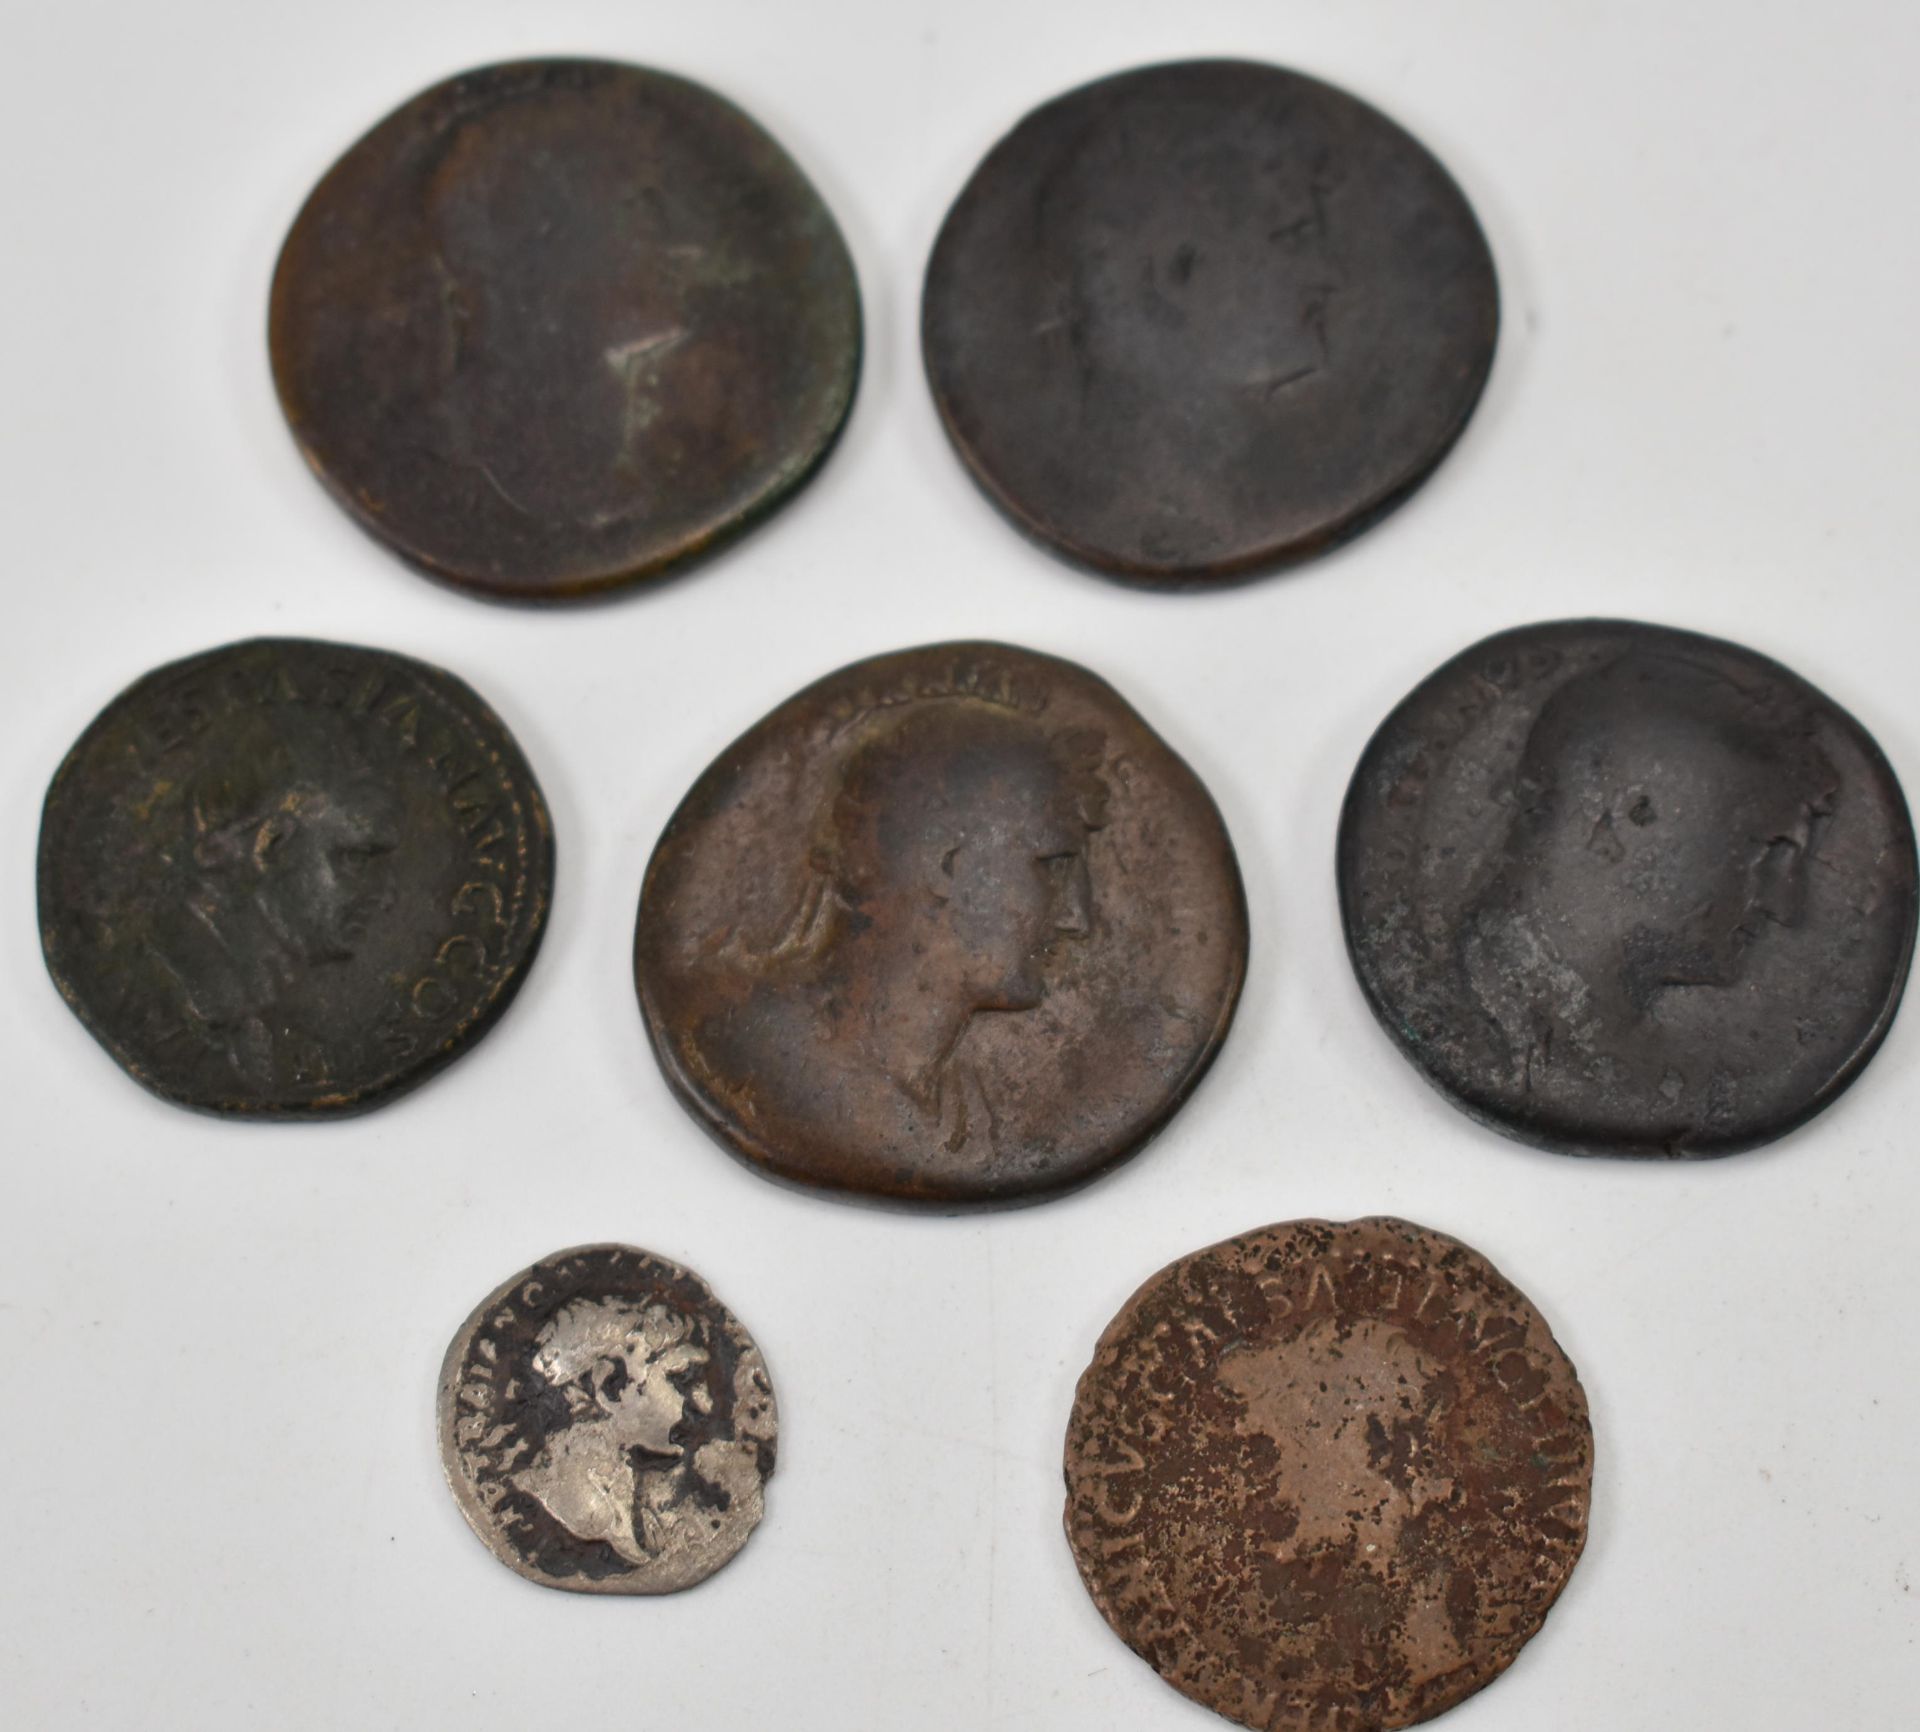 COLLECTION OF ROMAN IMPERIAL COINAGE